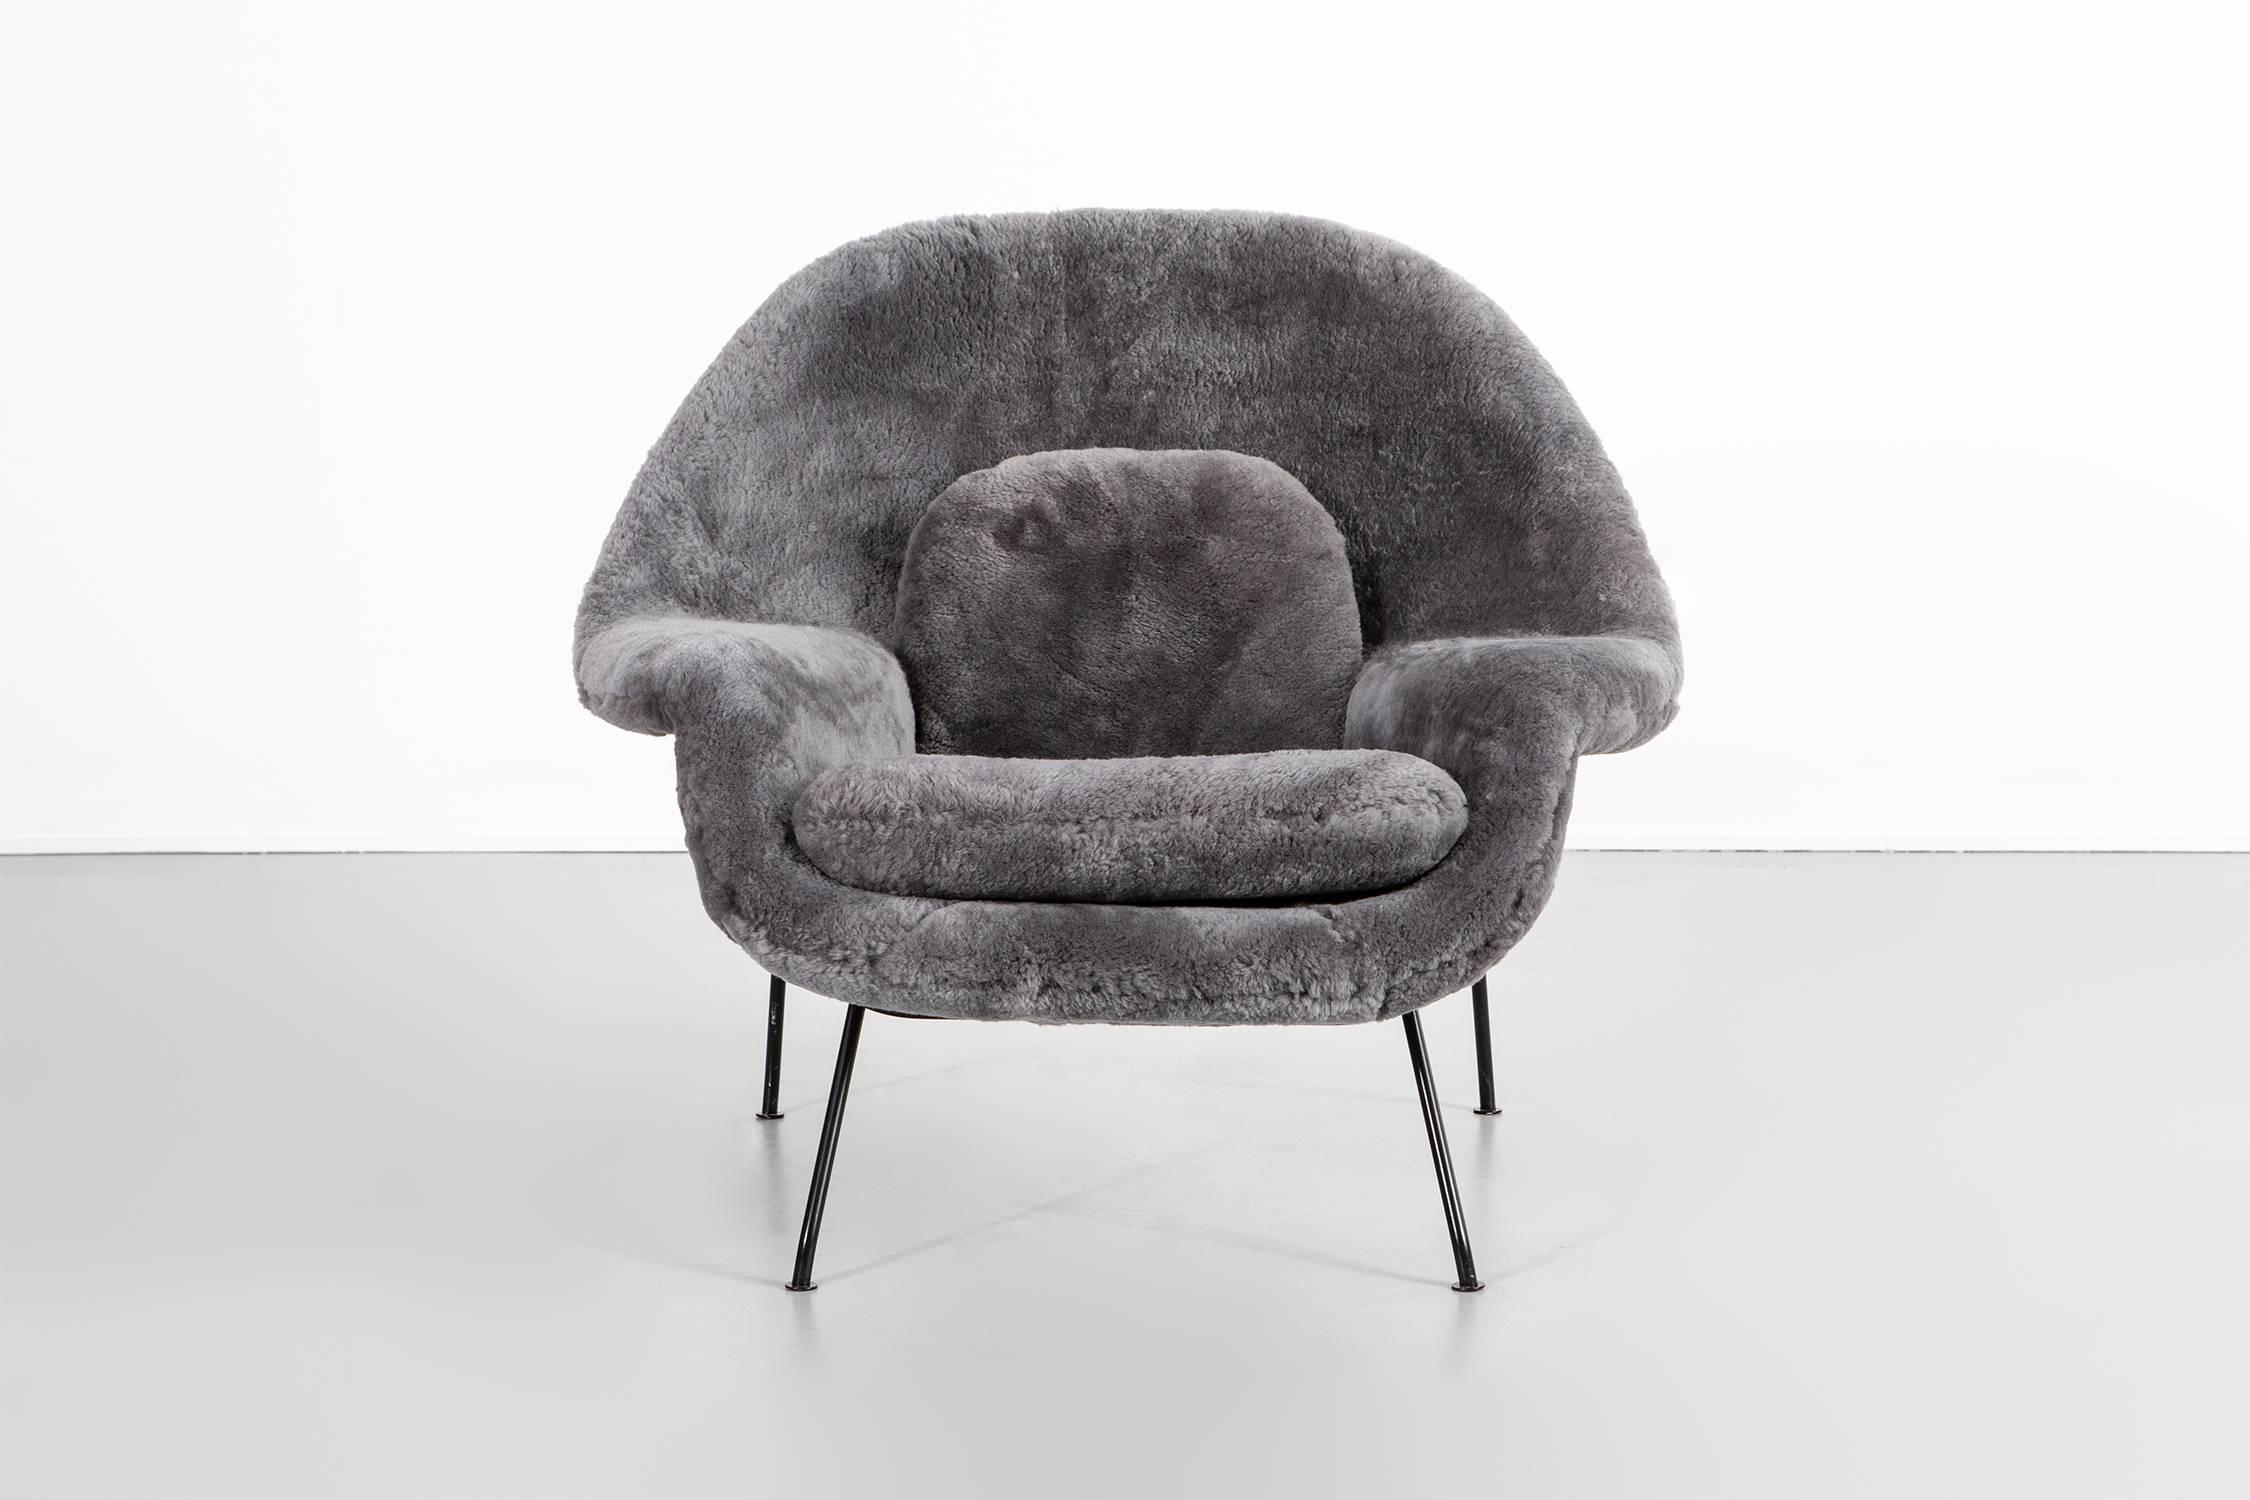 Set of Womb chairs

Designed by Eero Saarinen for Knoll

USA, d 1948 / circa 1960s

Reupholstered in charcoal shearling and black steel frame

Measure: 35 ½